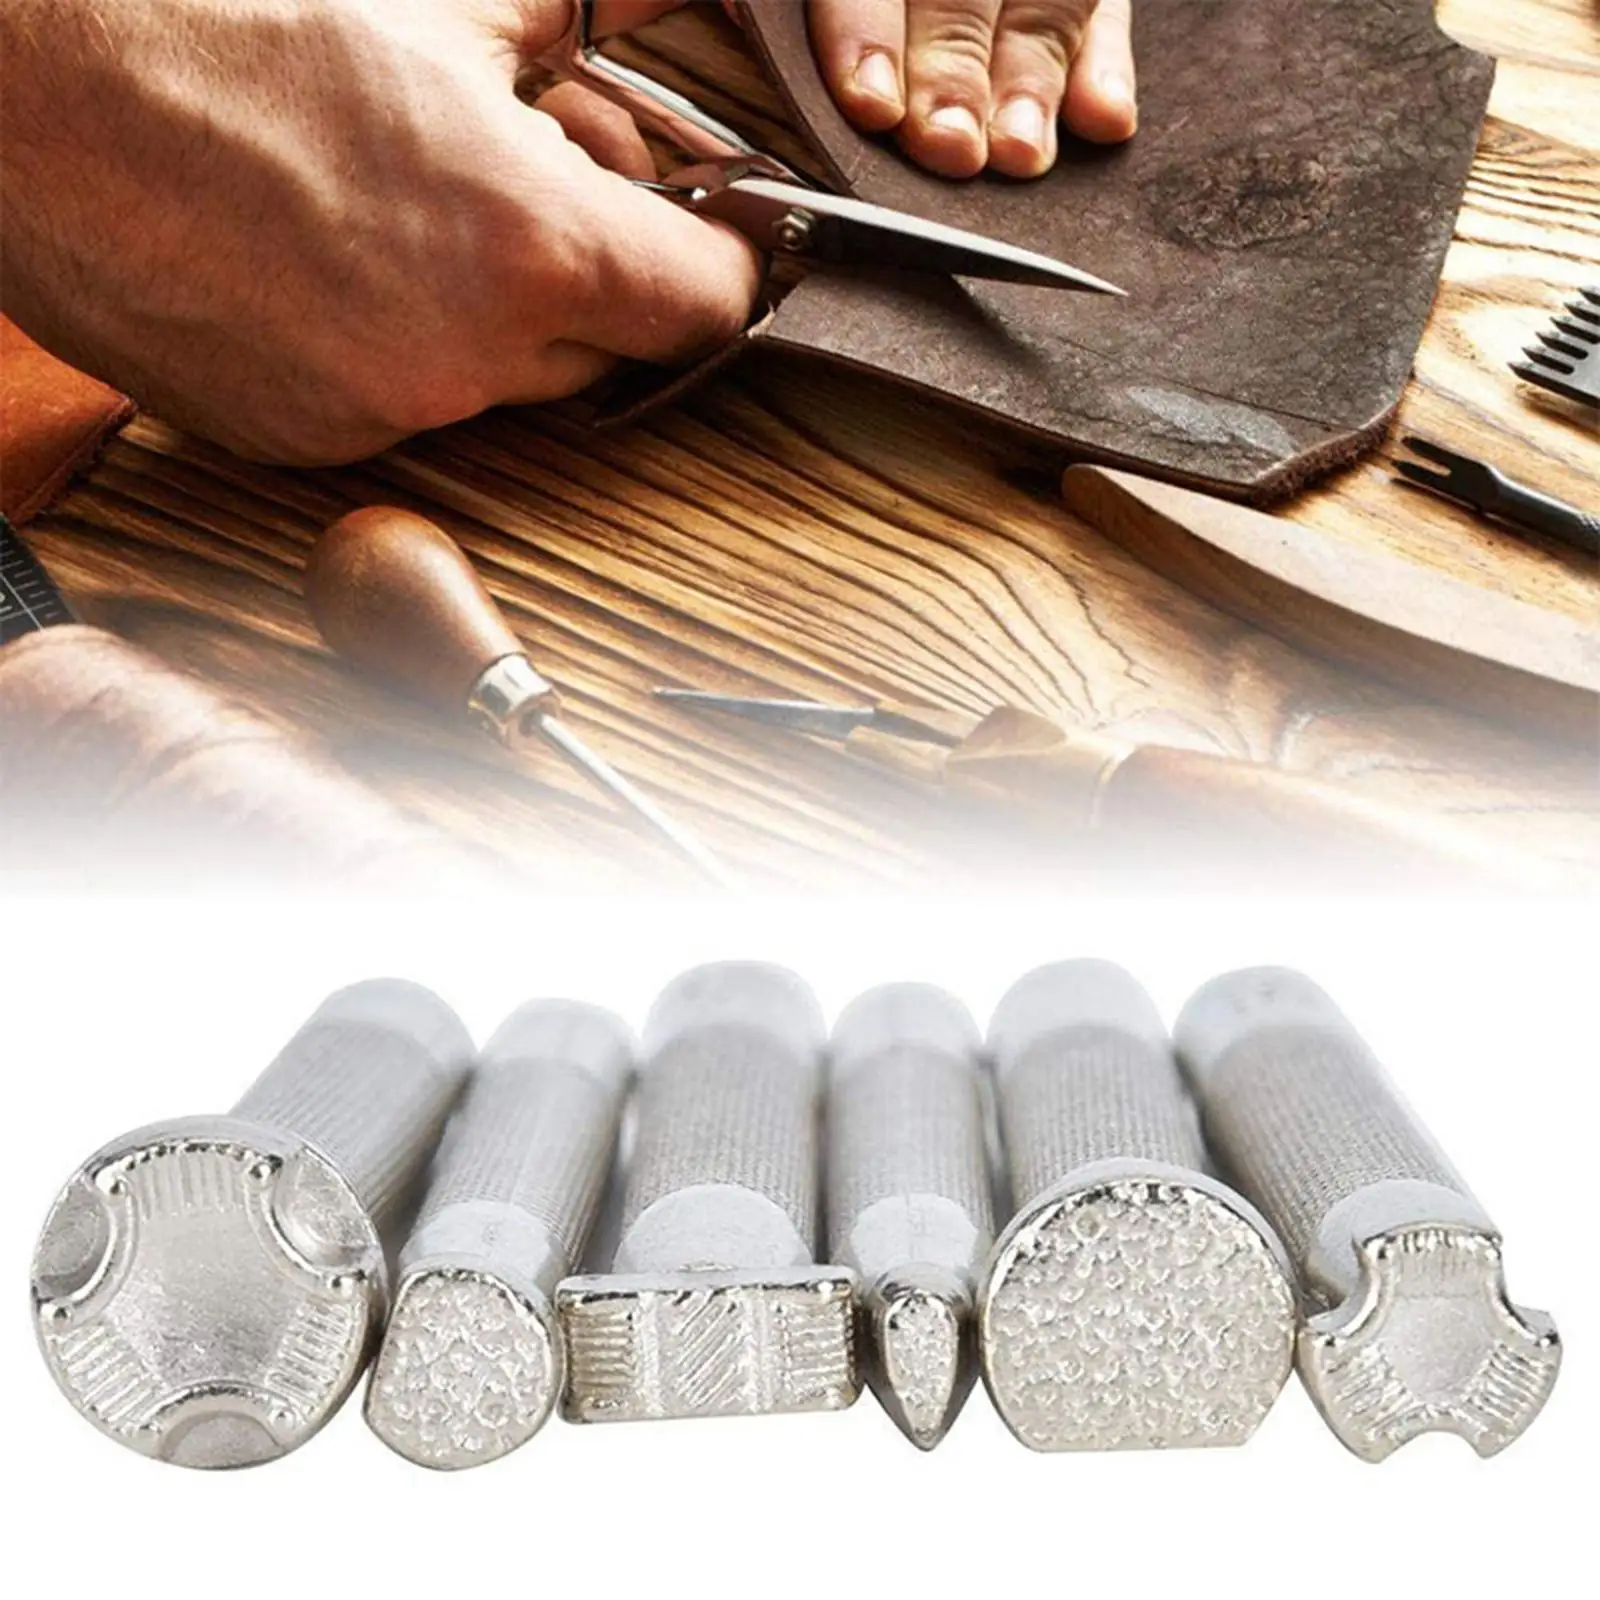 6x Alloy Carving Saddle Carving Leather Craft Stamps Pressing Punch Sets for Leather